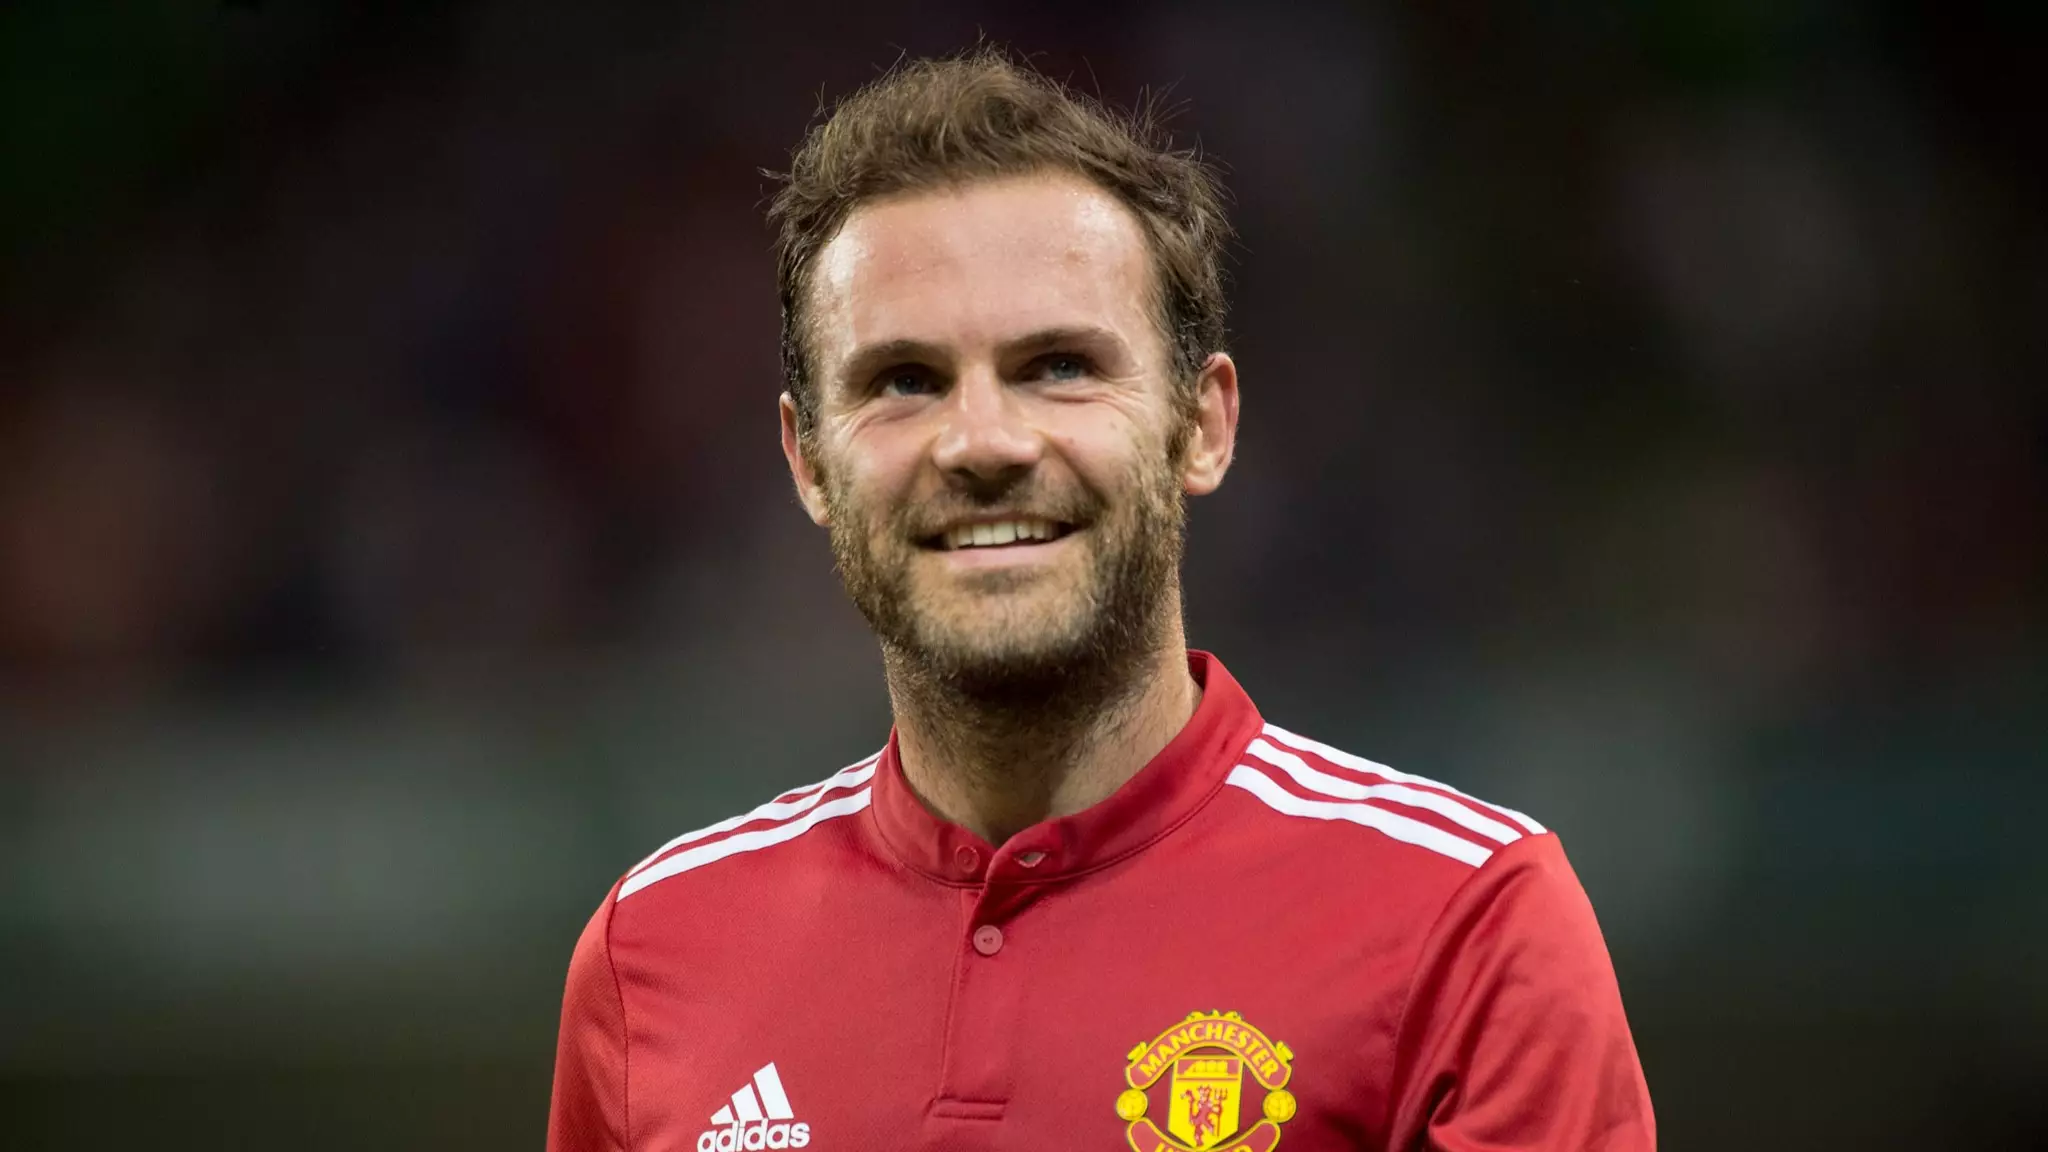 Juan Mata Reveals Who The Best Player He's Played With Is